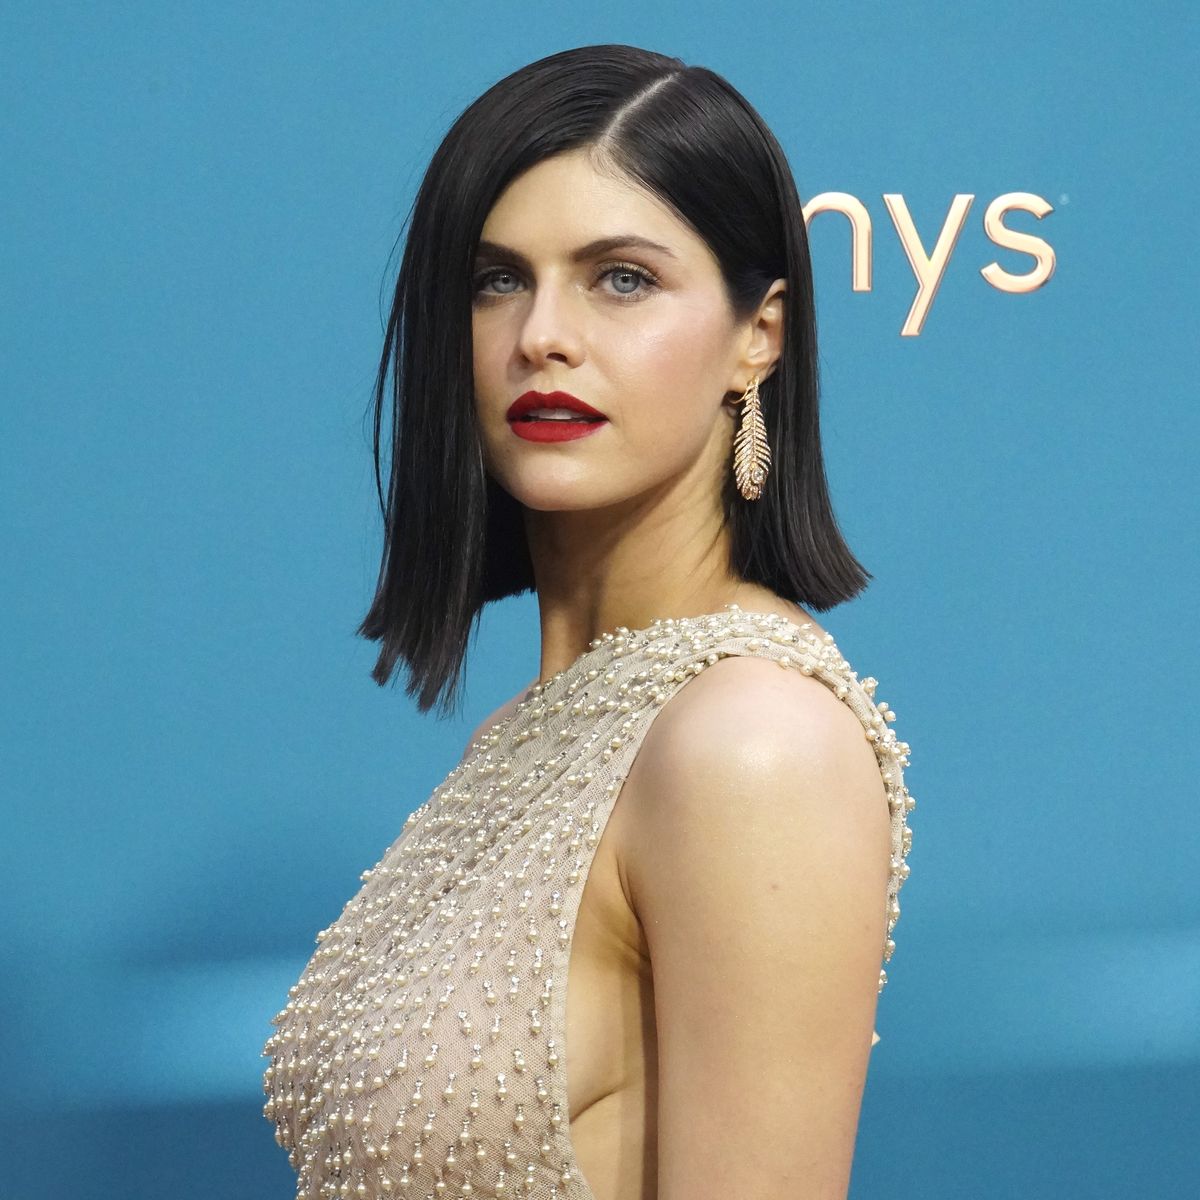 Alexandra Daddario Porn - Alexandra Daddario Is Toned While Skinny-Dipping In A Nude IG Pic